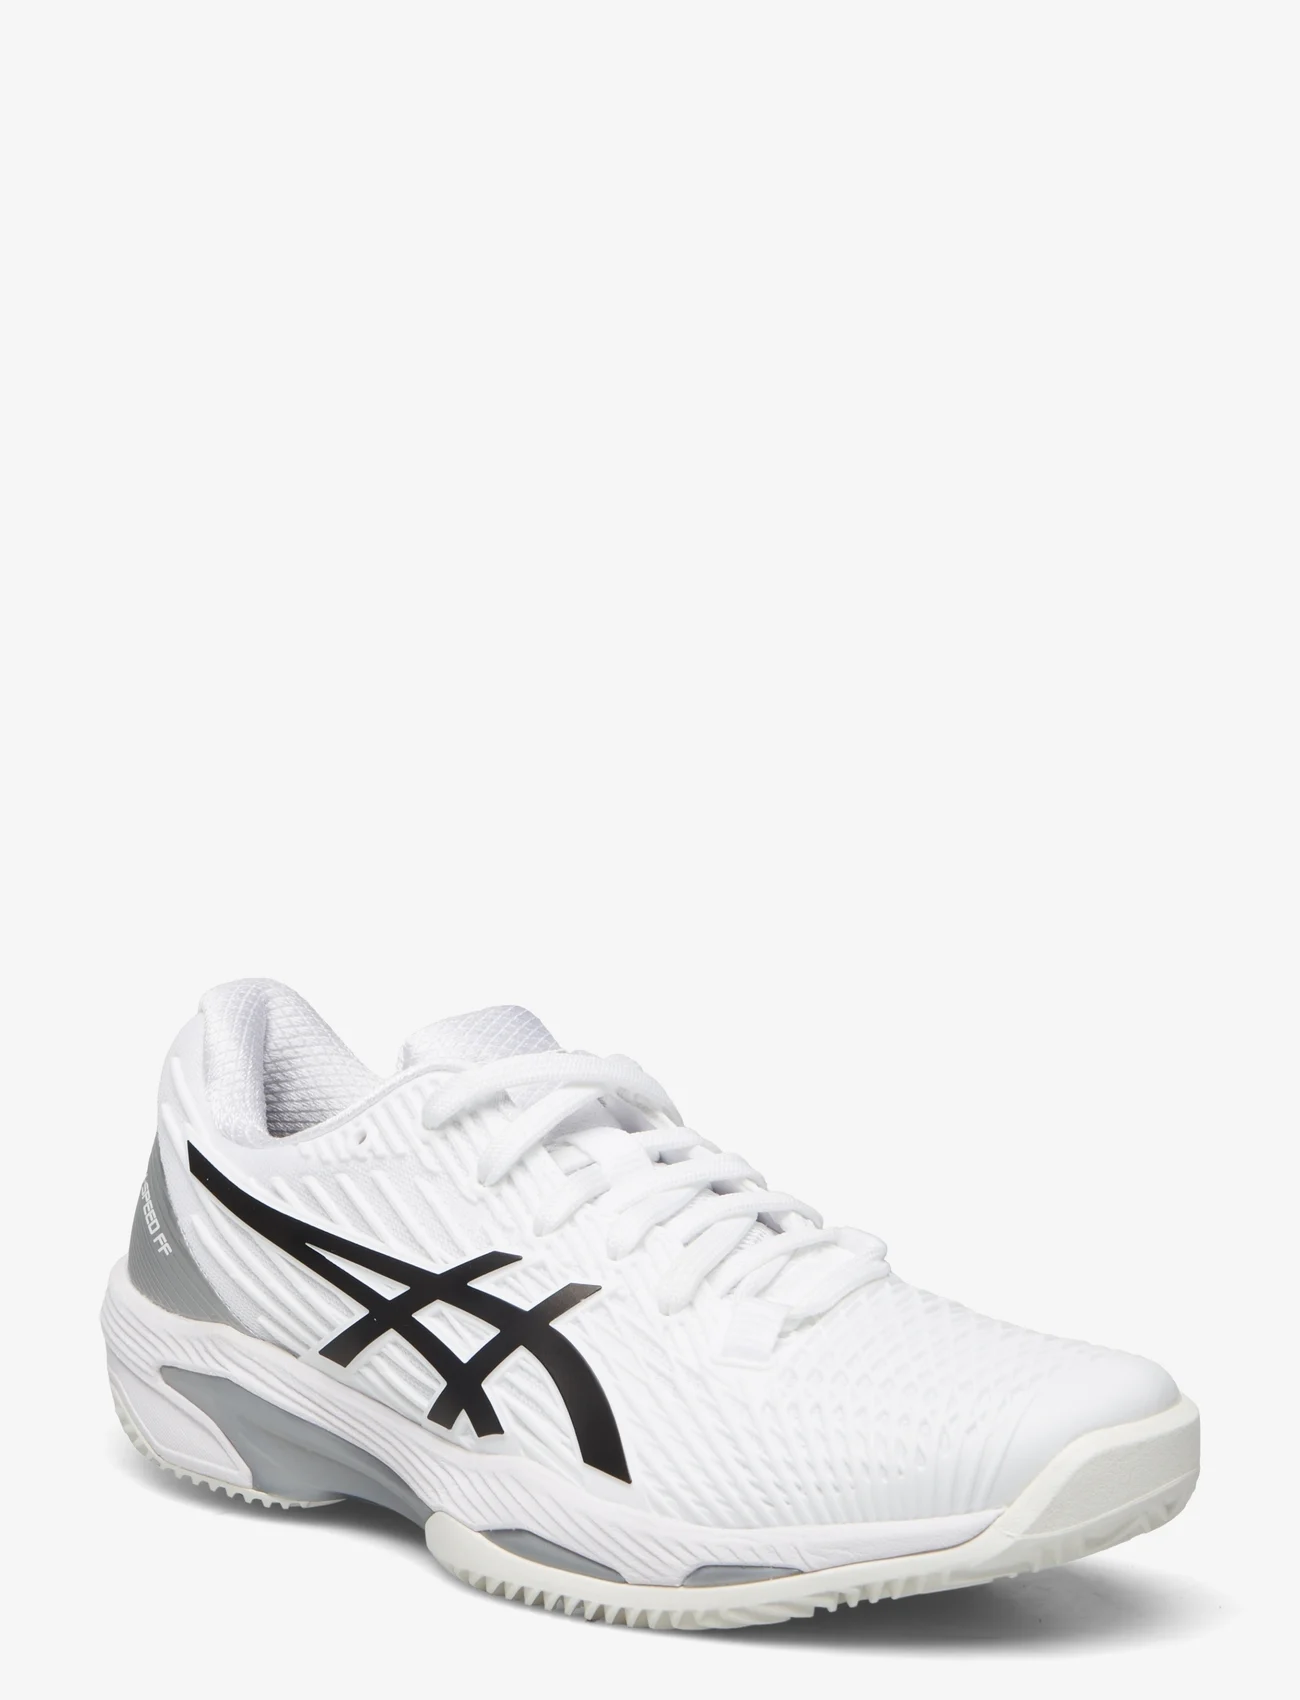 Asics - SOLUTION SPEED FF 2 CLAY - white/black - 0